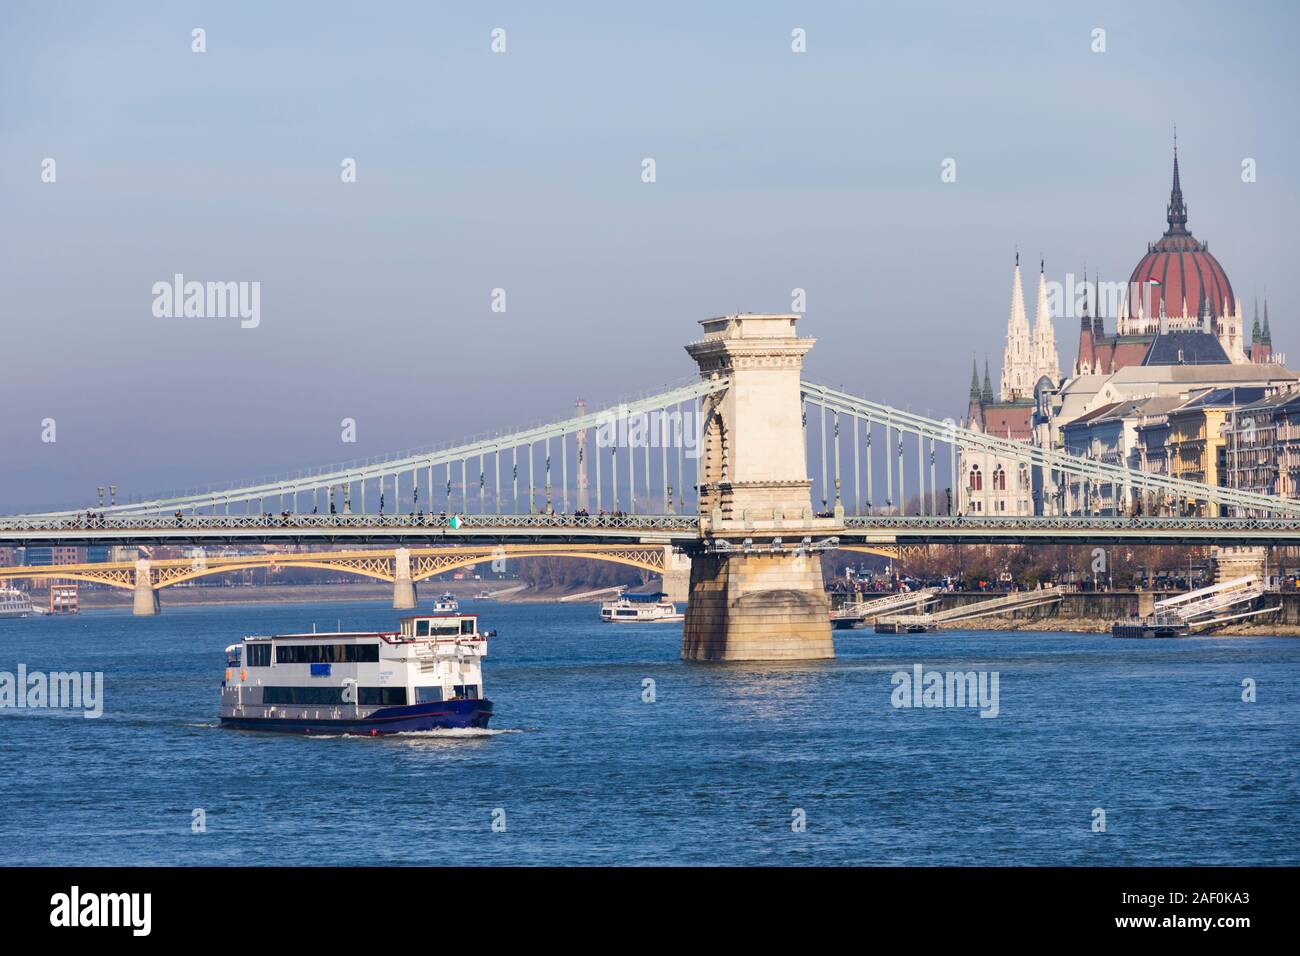 River Danube cruise ship passes under the Chain Bridge with the Parliament building behind. Budapest, Hungary. December 2019 Stock Photo